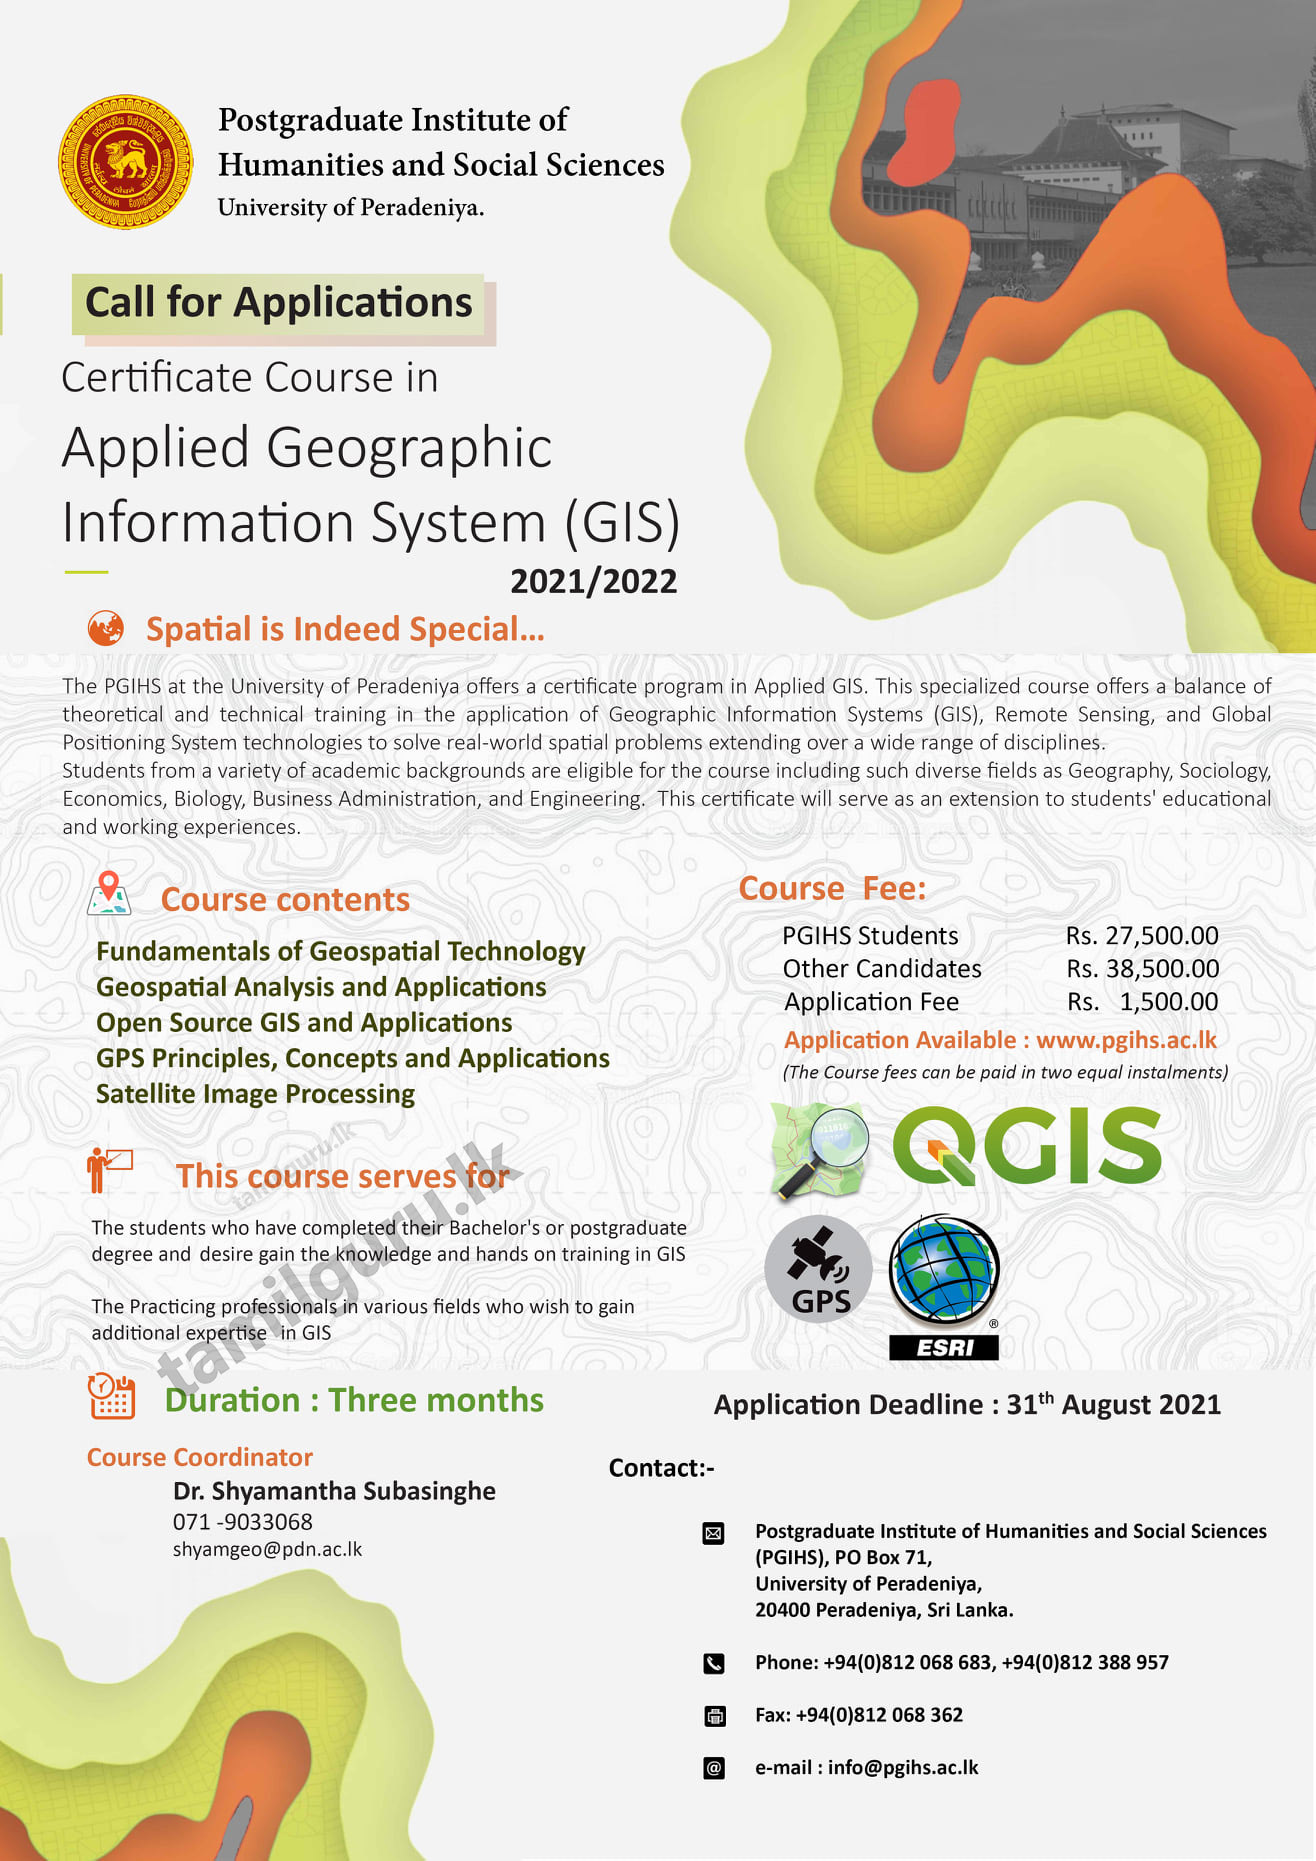 Certificate Course in Applied Geographic Information System (GIS) - University of Peradeniya